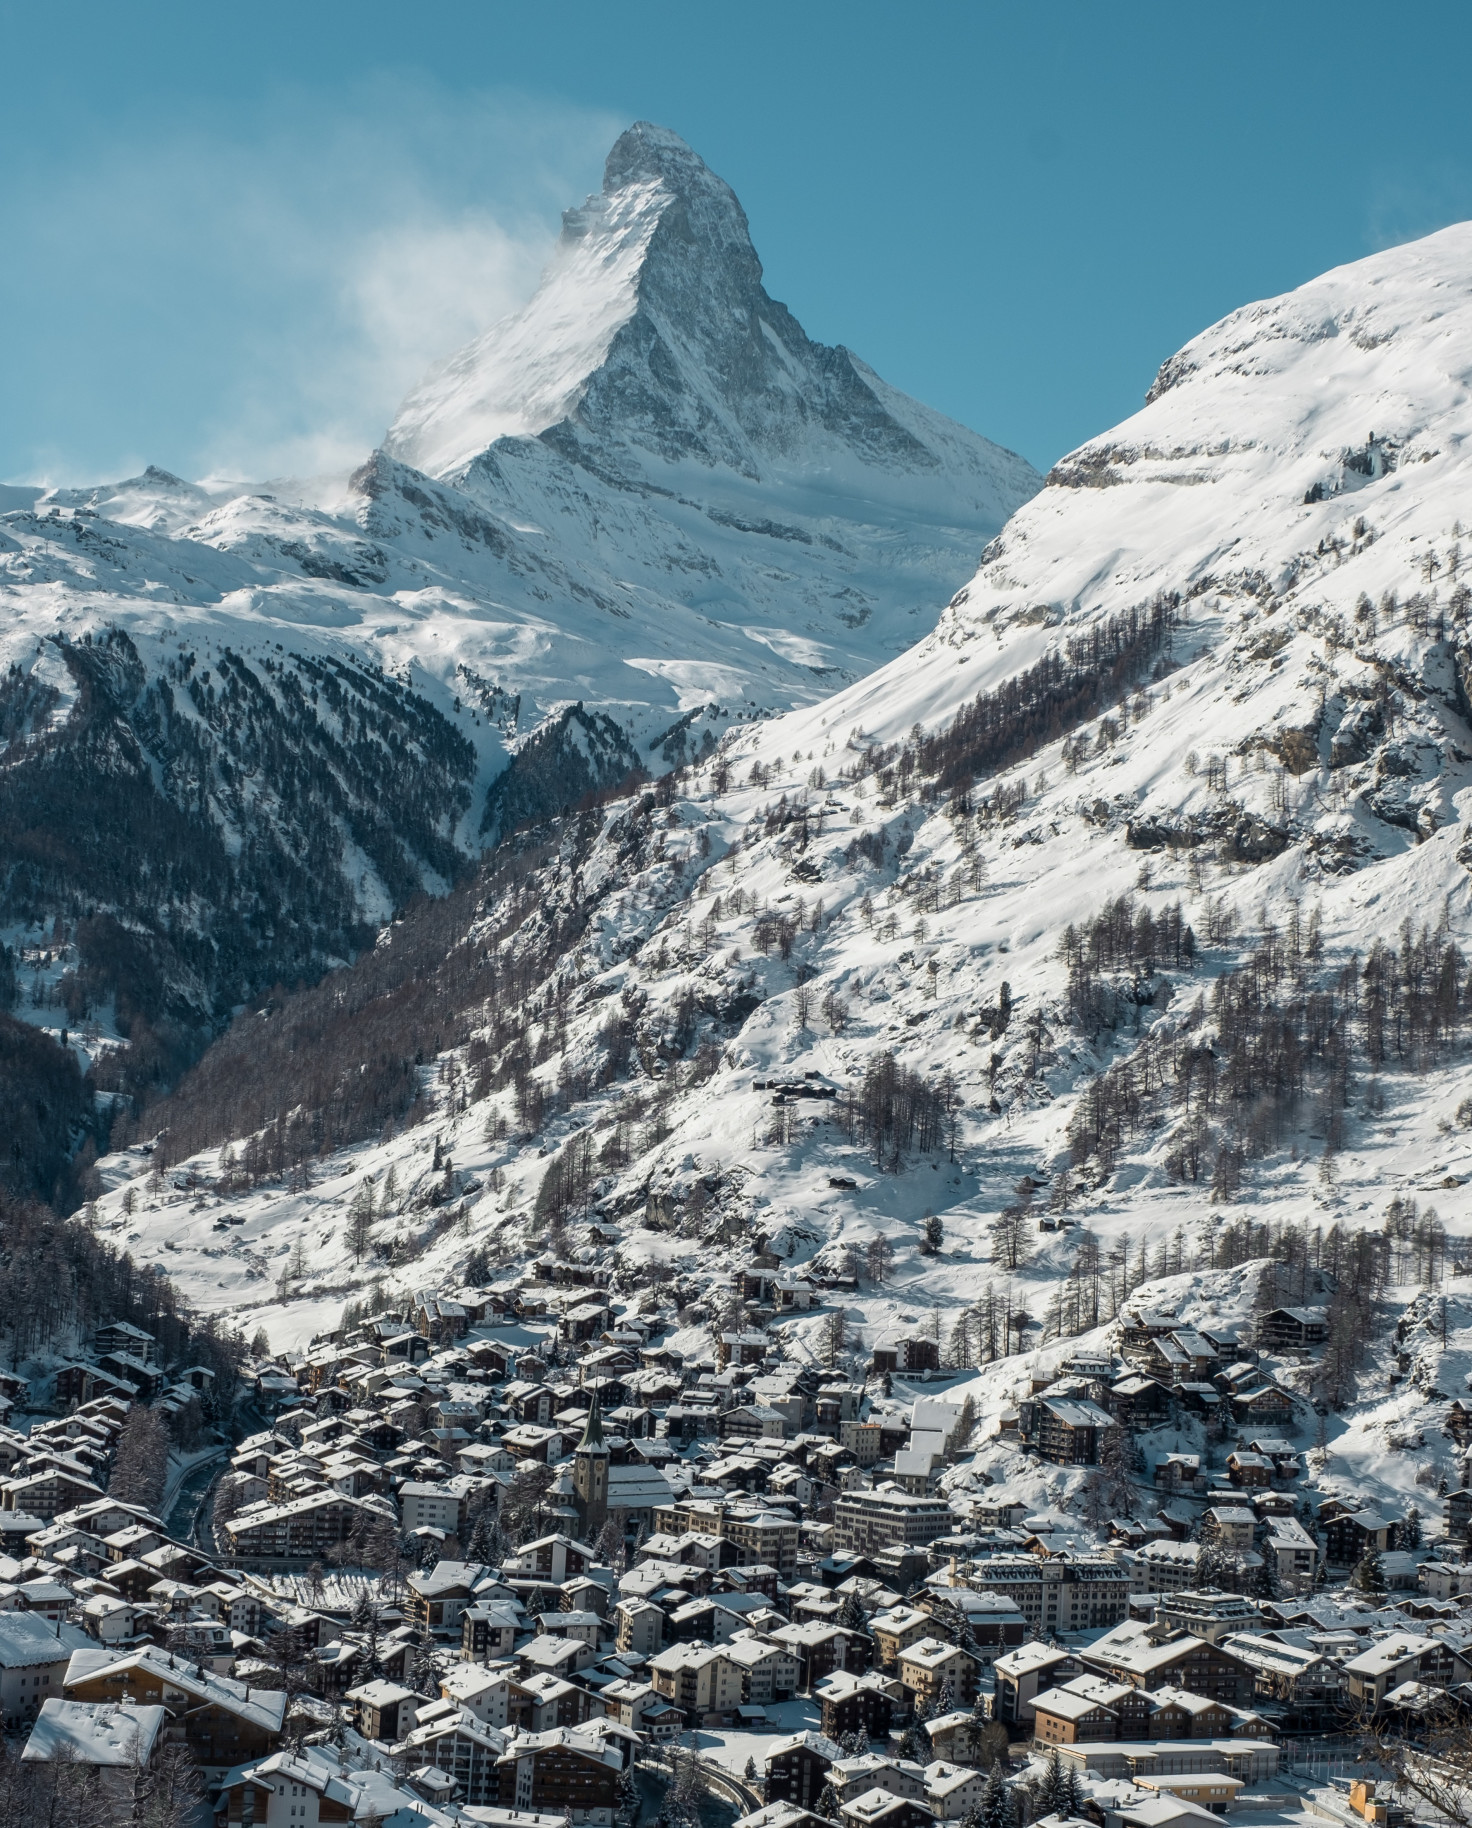 village in a valley surrounded by snowy mountains during daytime